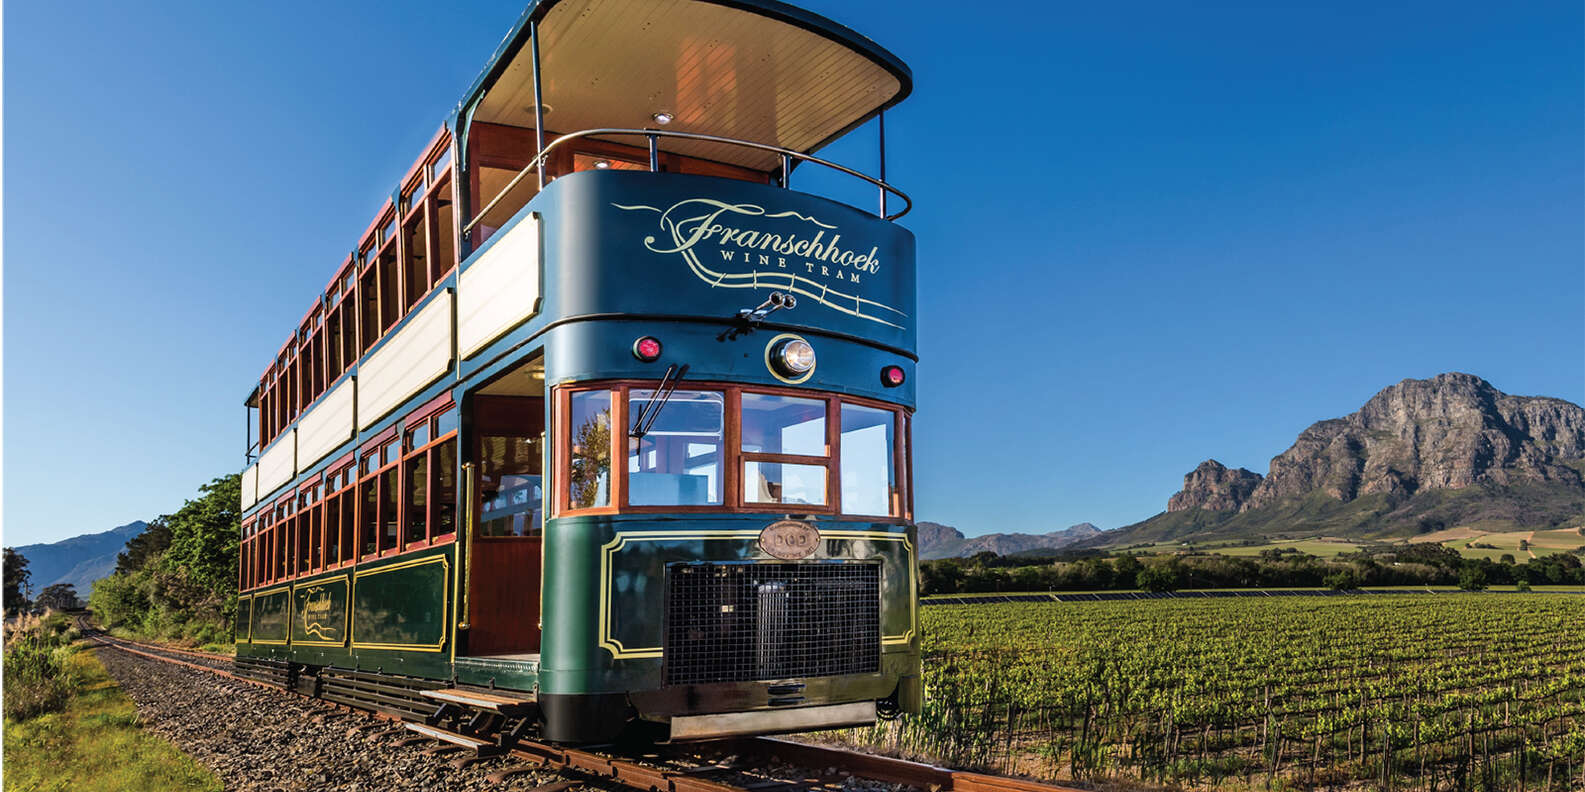 What to do in Franschhoek